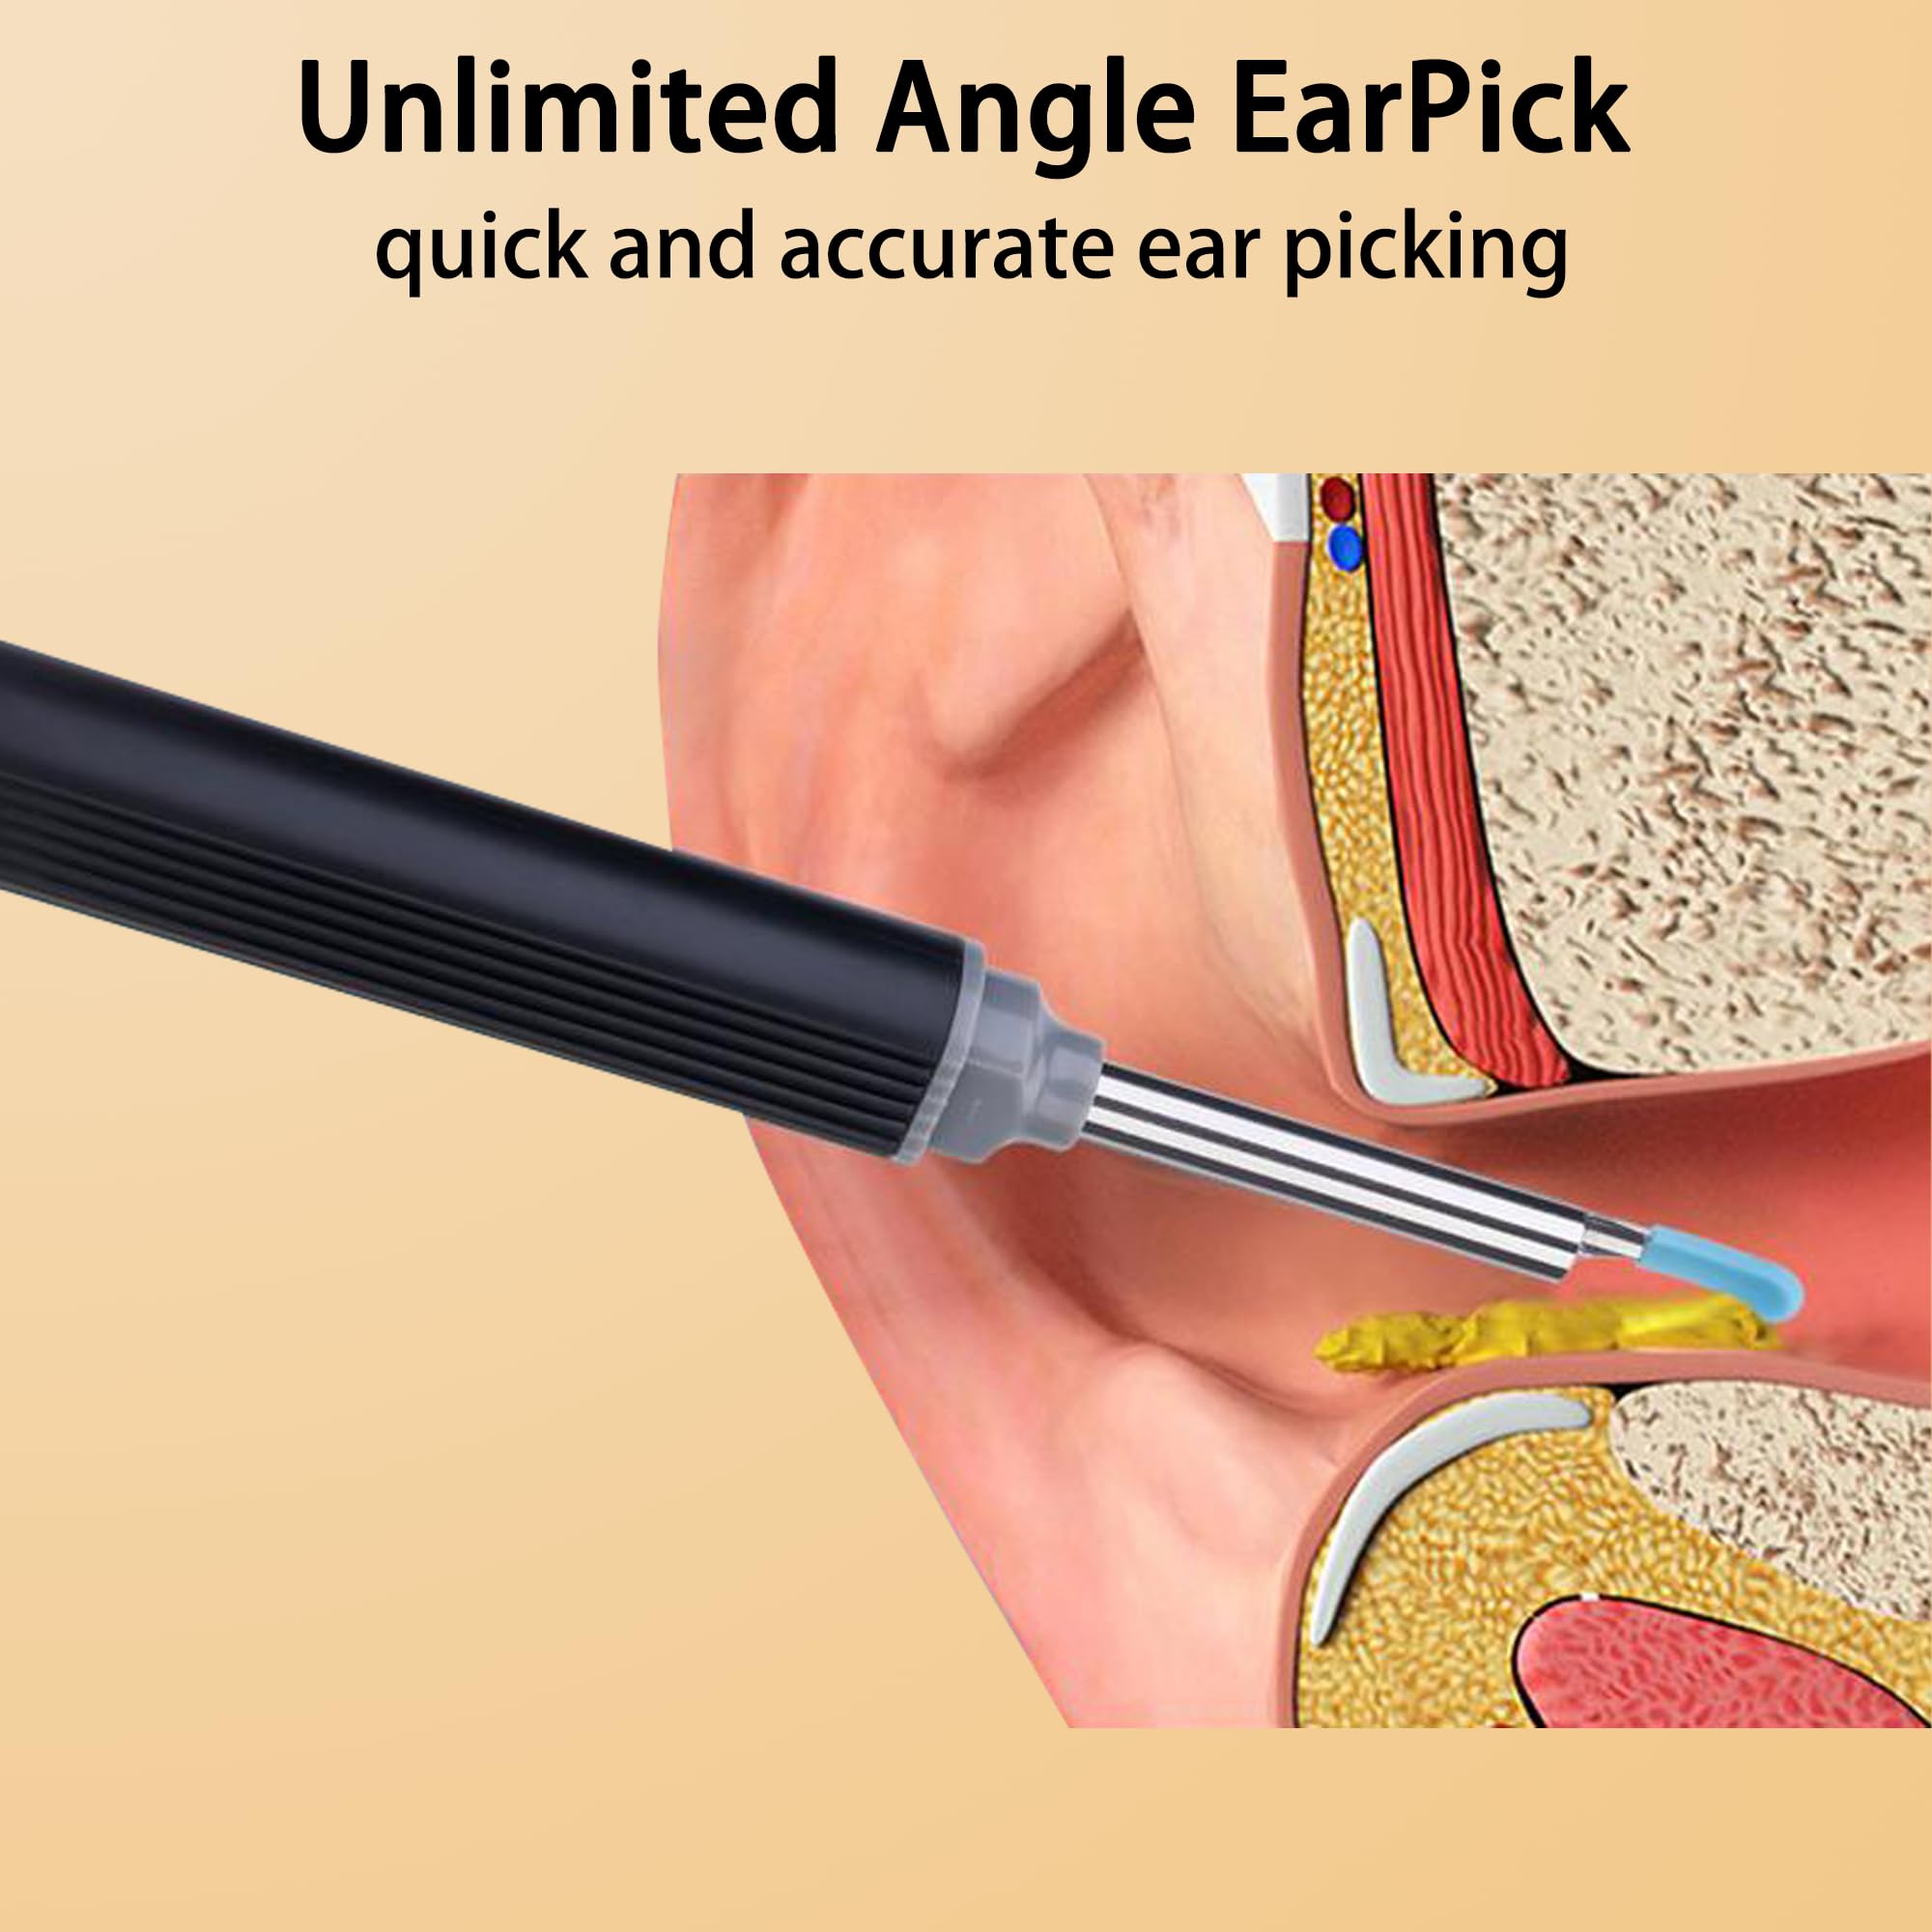 Ear Wax Removal with Camera - Smart Ear Canal Explorer, HD Imaging for Effective Cleaning